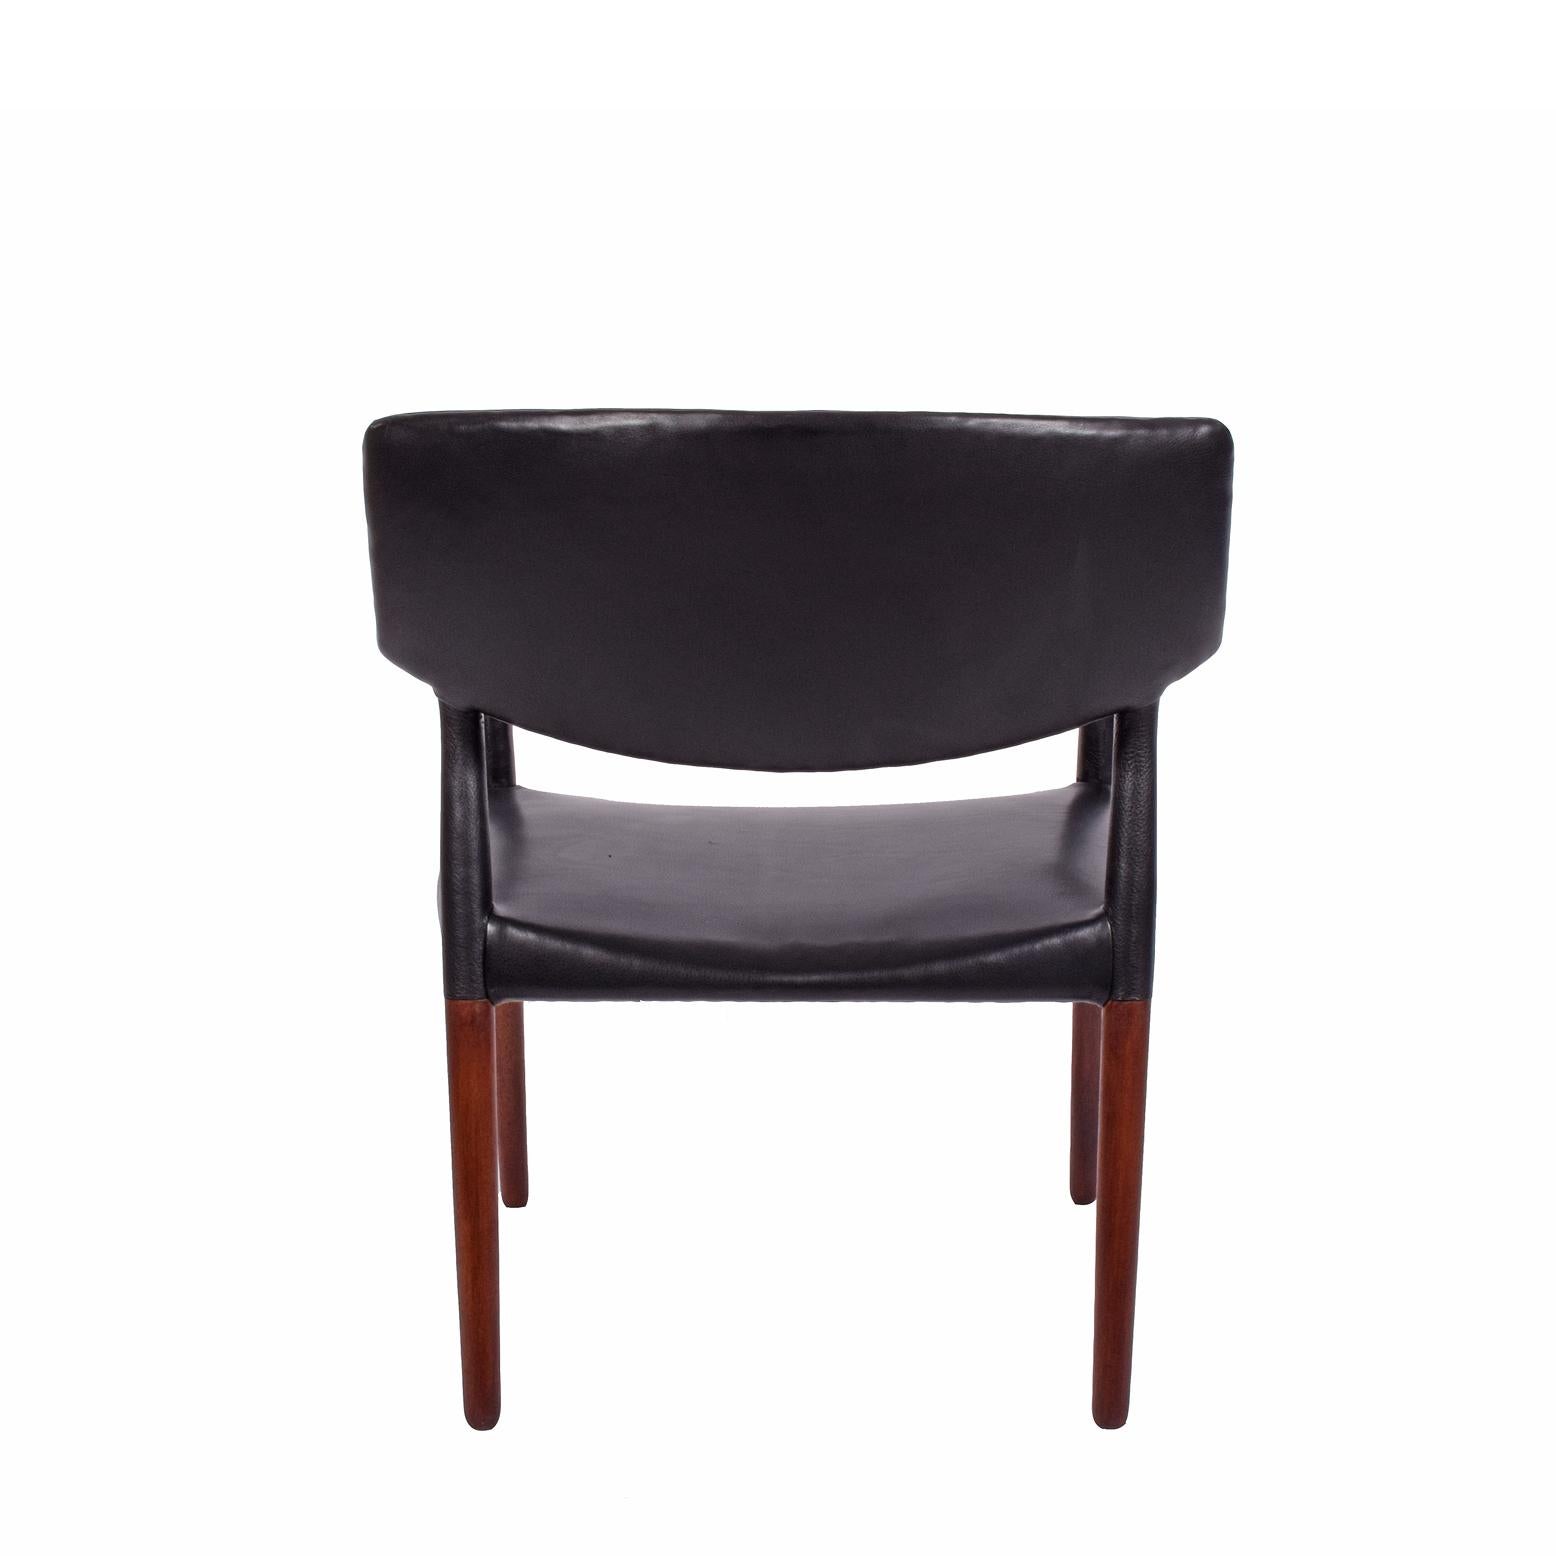 Armchair design in 1949 slid teak legs with black leather upholstery made by Willy Beck.